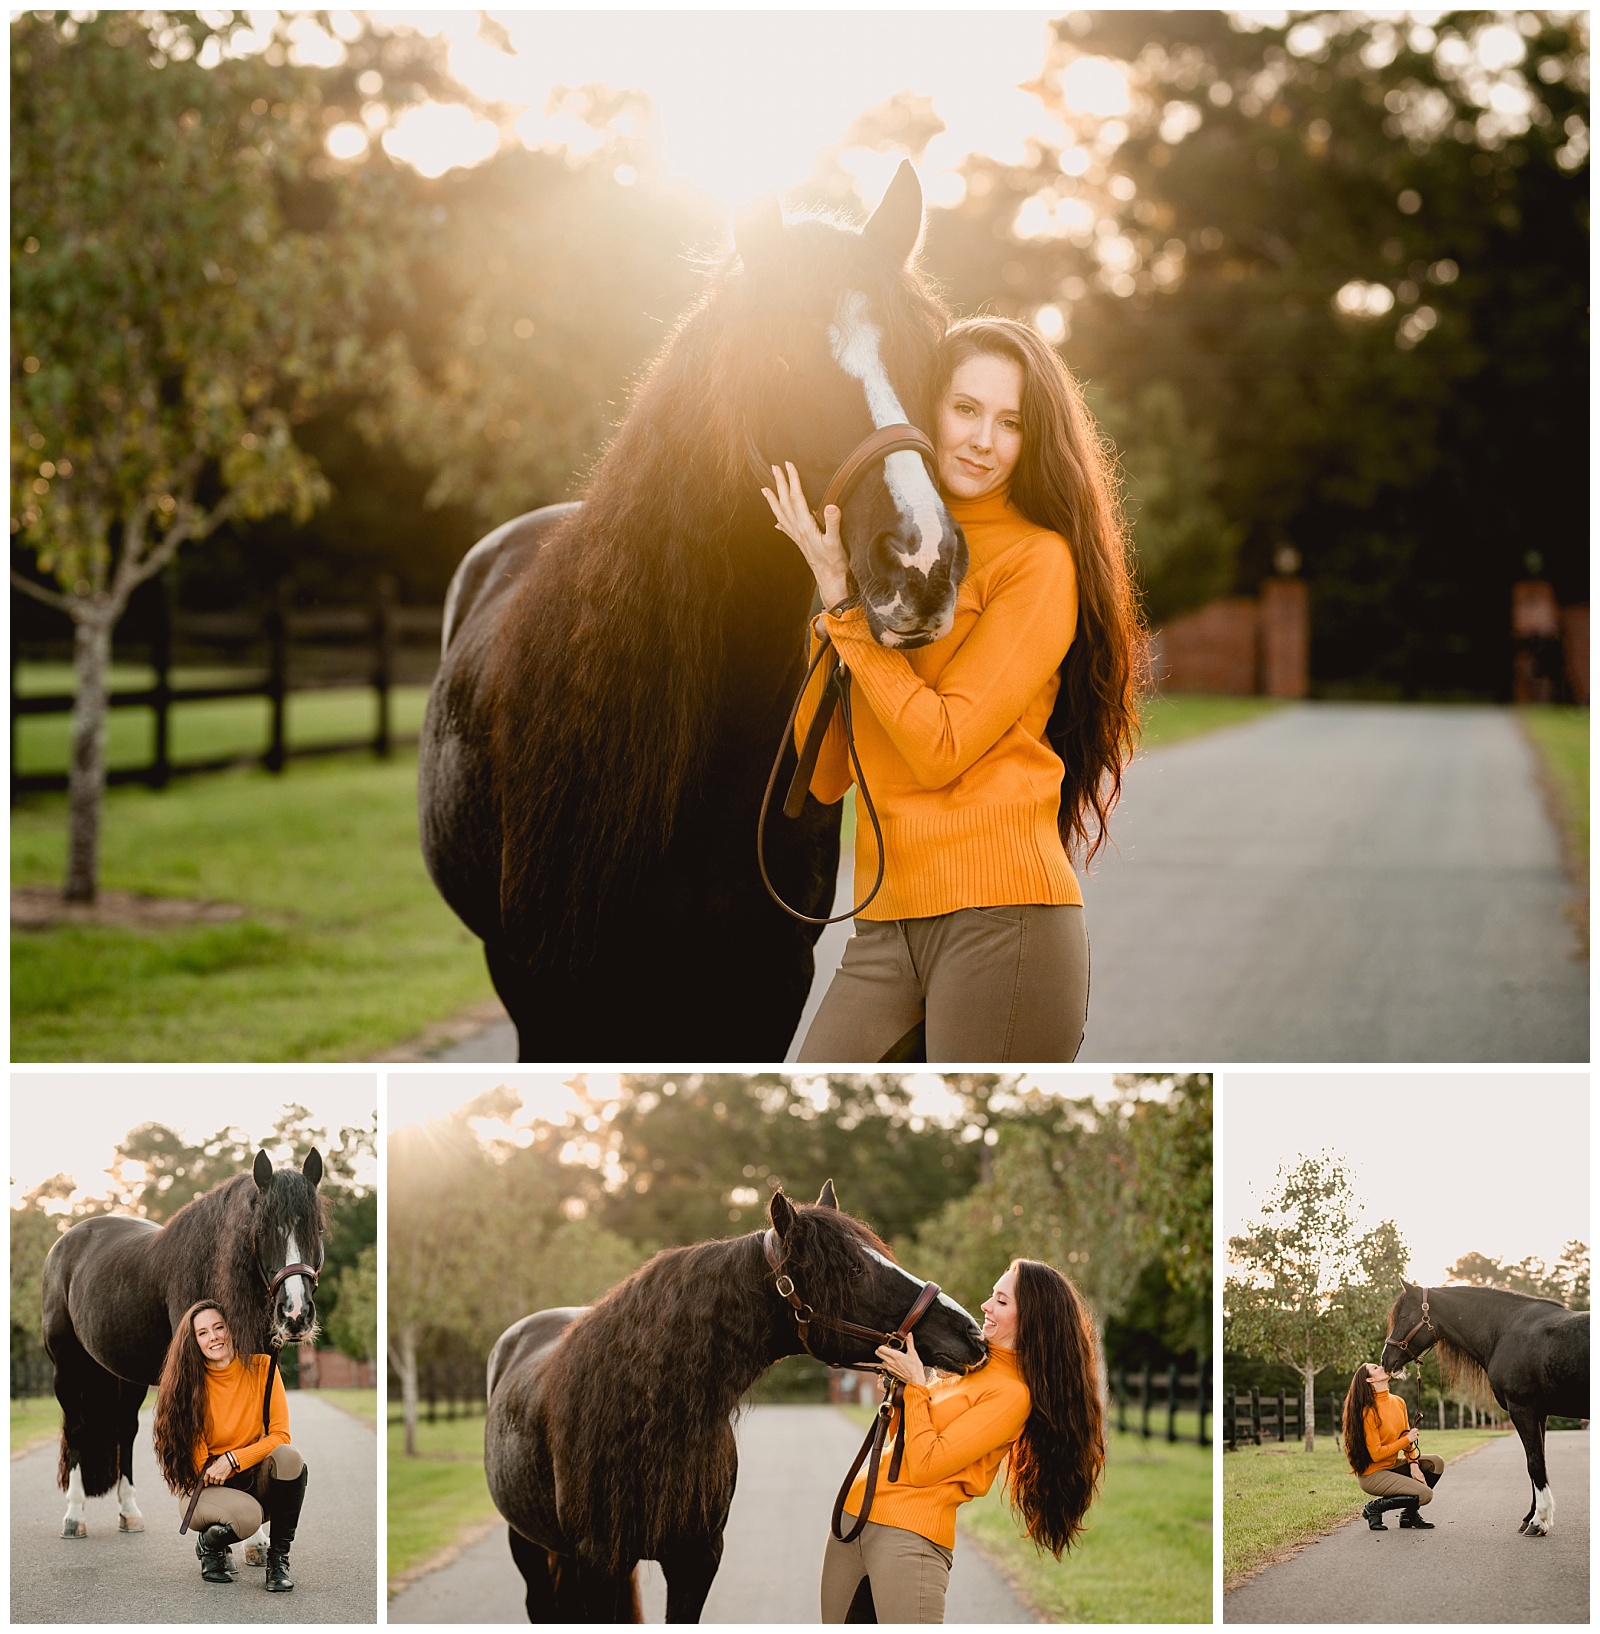 Beautiful golden hour near Tallahassee, FL. Woman and her black dressage horse take photos together.